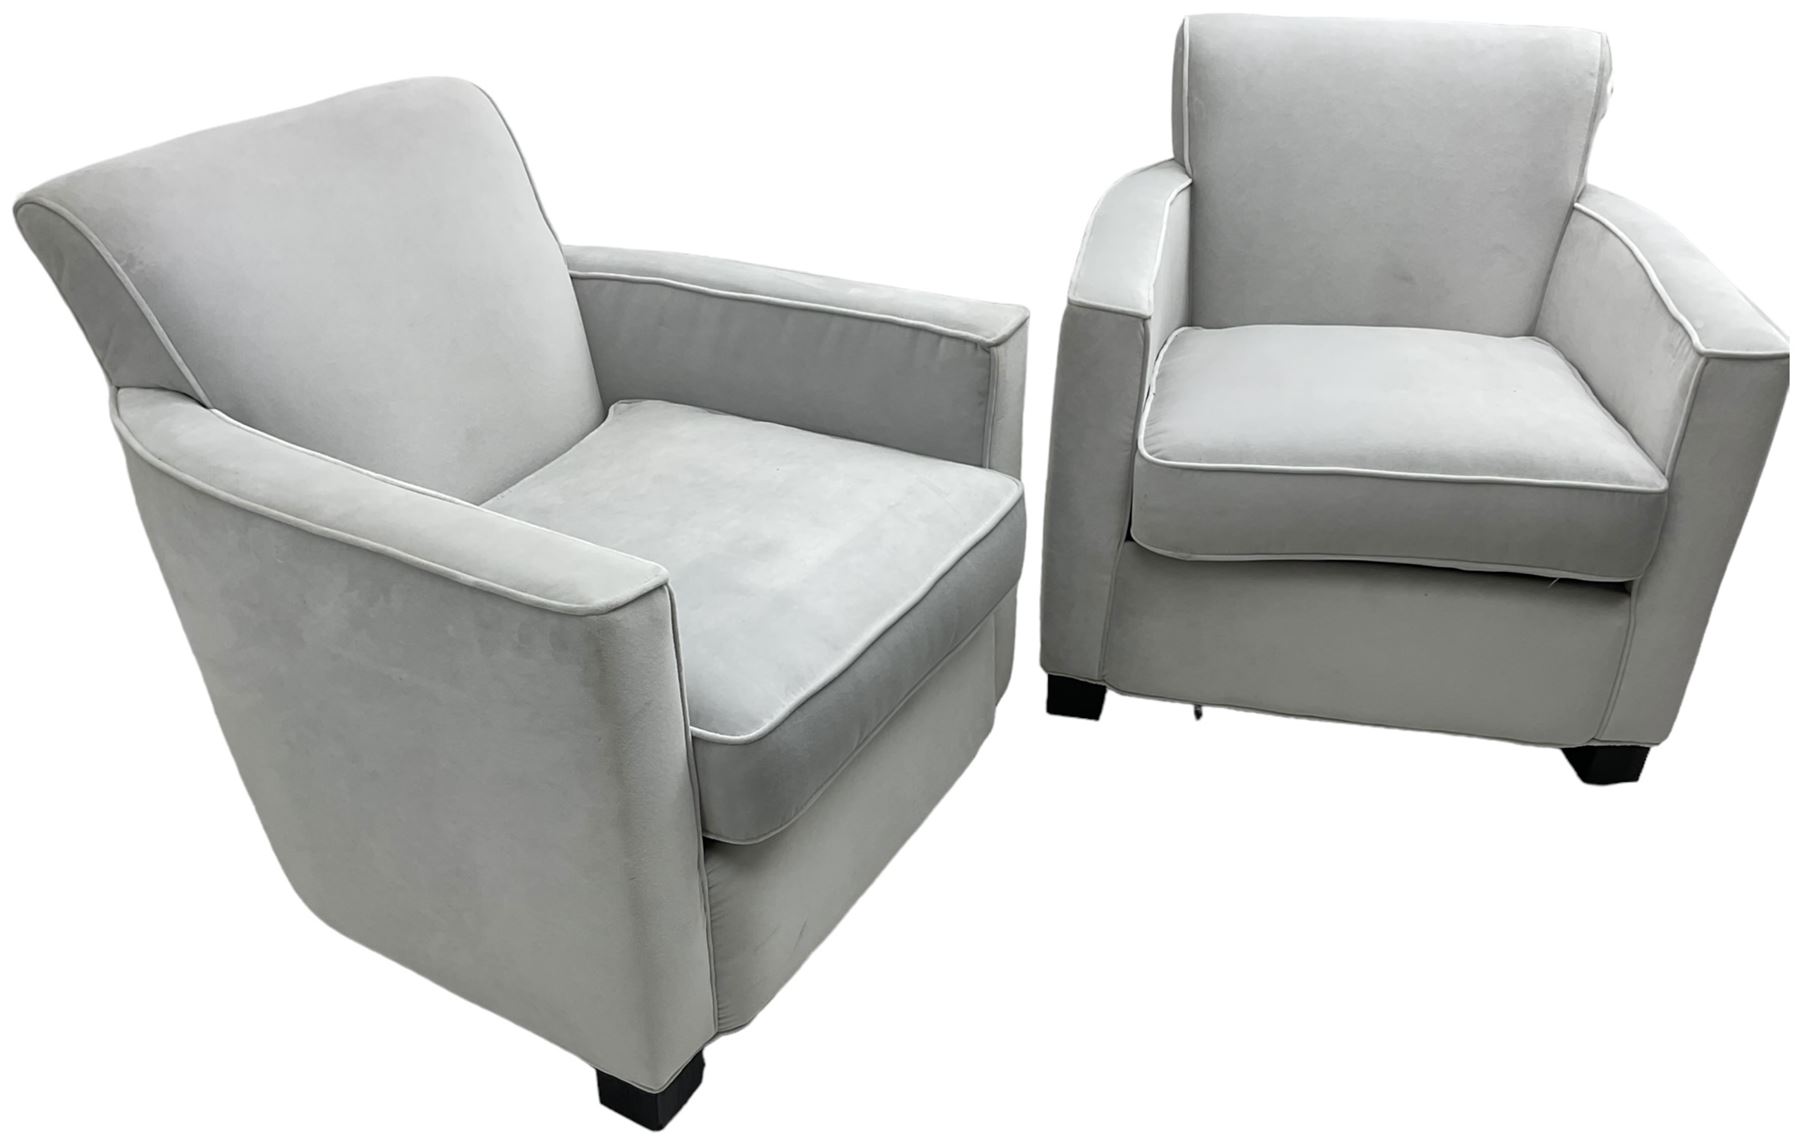 India Jane Interiors - 'Savoy' pair of contemporary armchairs upholstered in light grey velvet fabri - Image 7 of 7